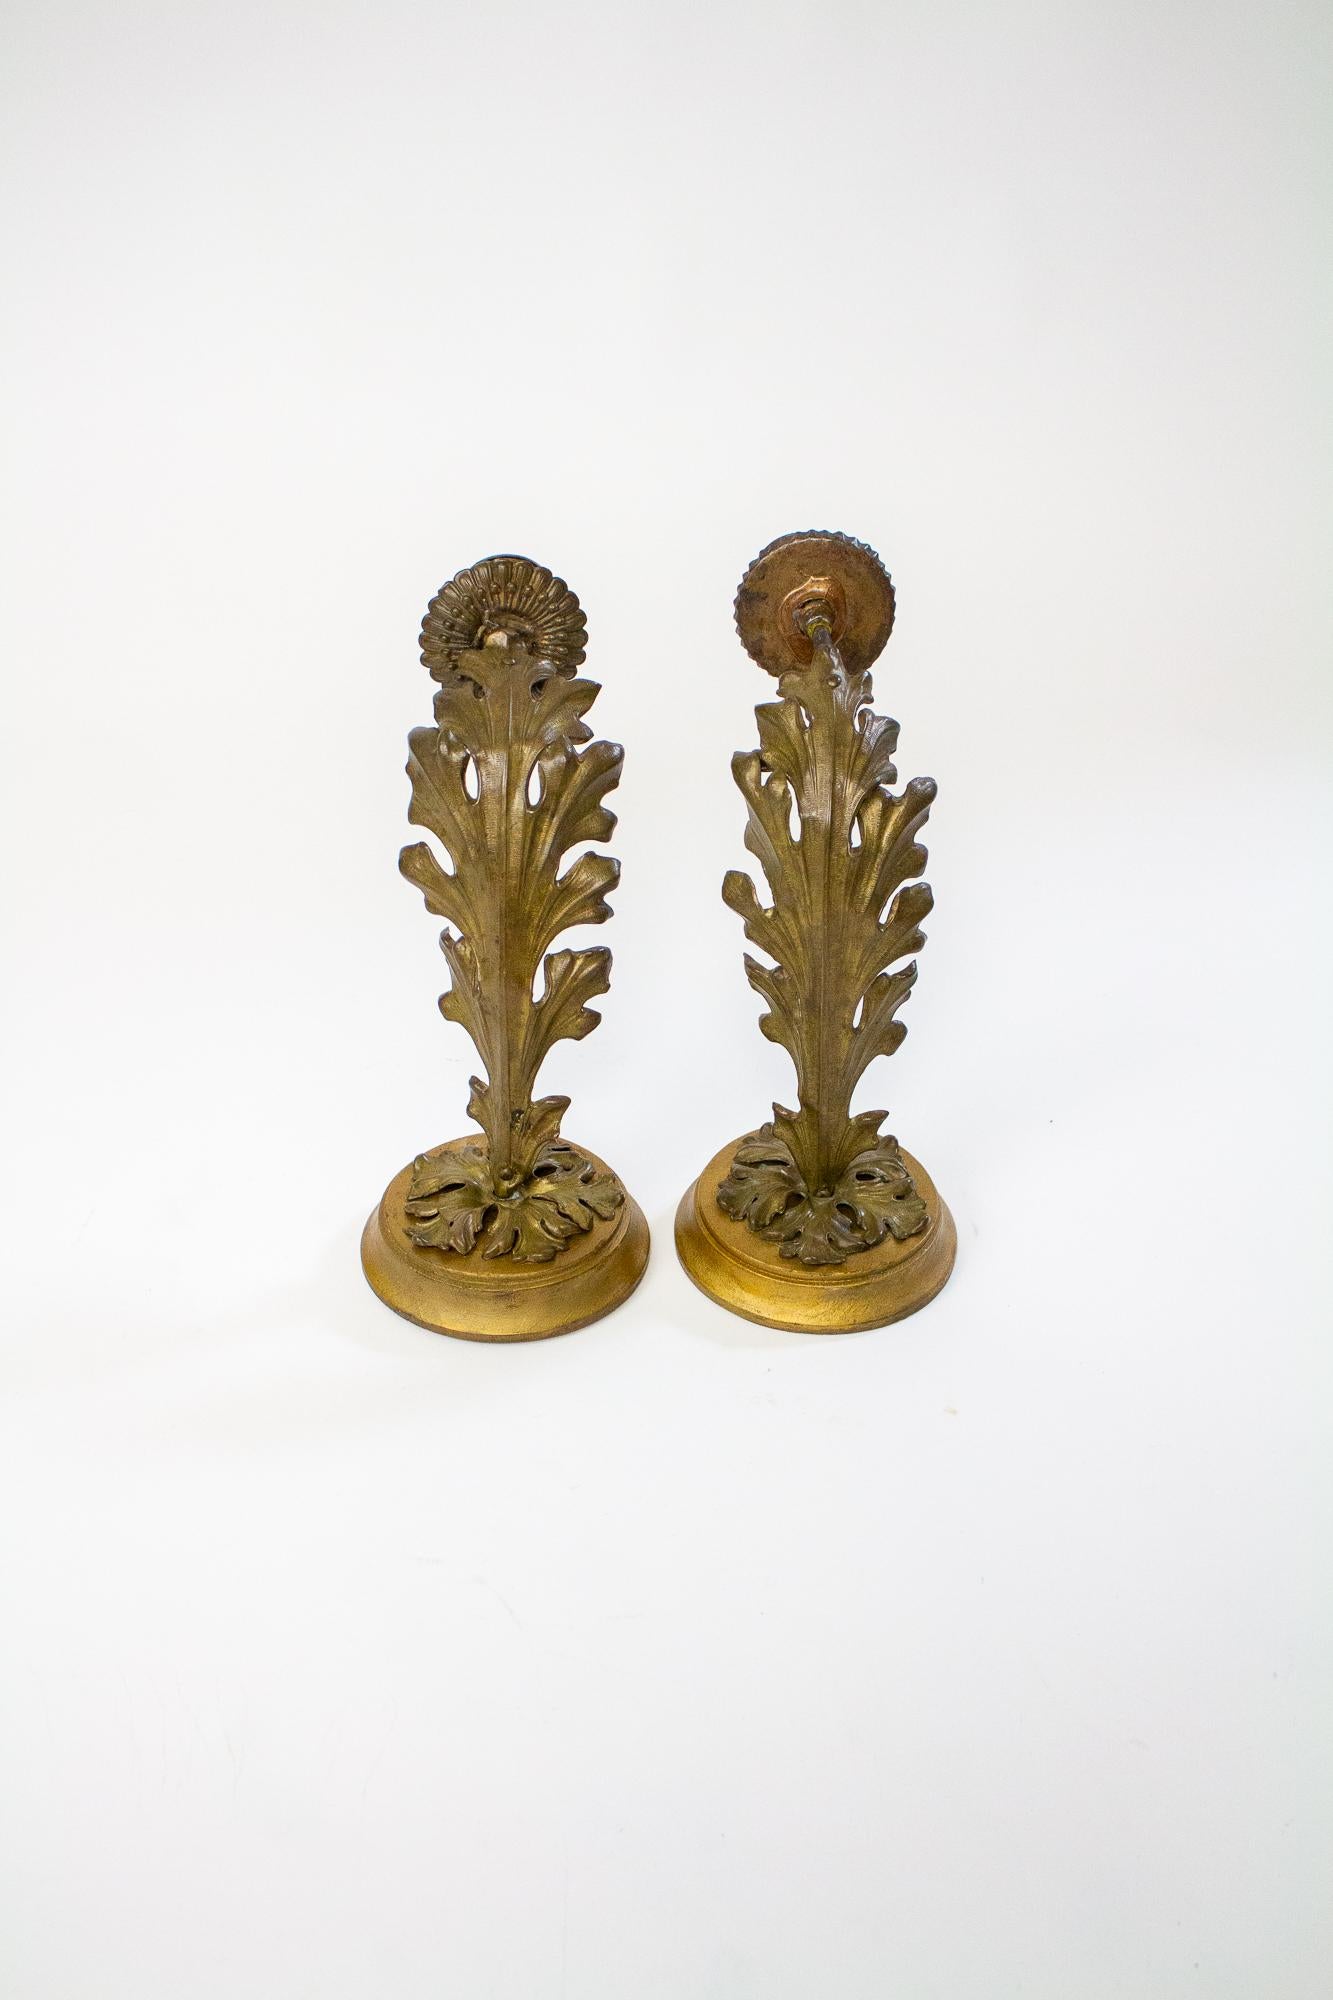 These sconces have large stamped brass leaves forming the arms, with a steel tube forming the structure. Round wooden backplates with stamped brass foliate ornaments. The bobeches are slightly different, and the candle cups are somewhat bent, but